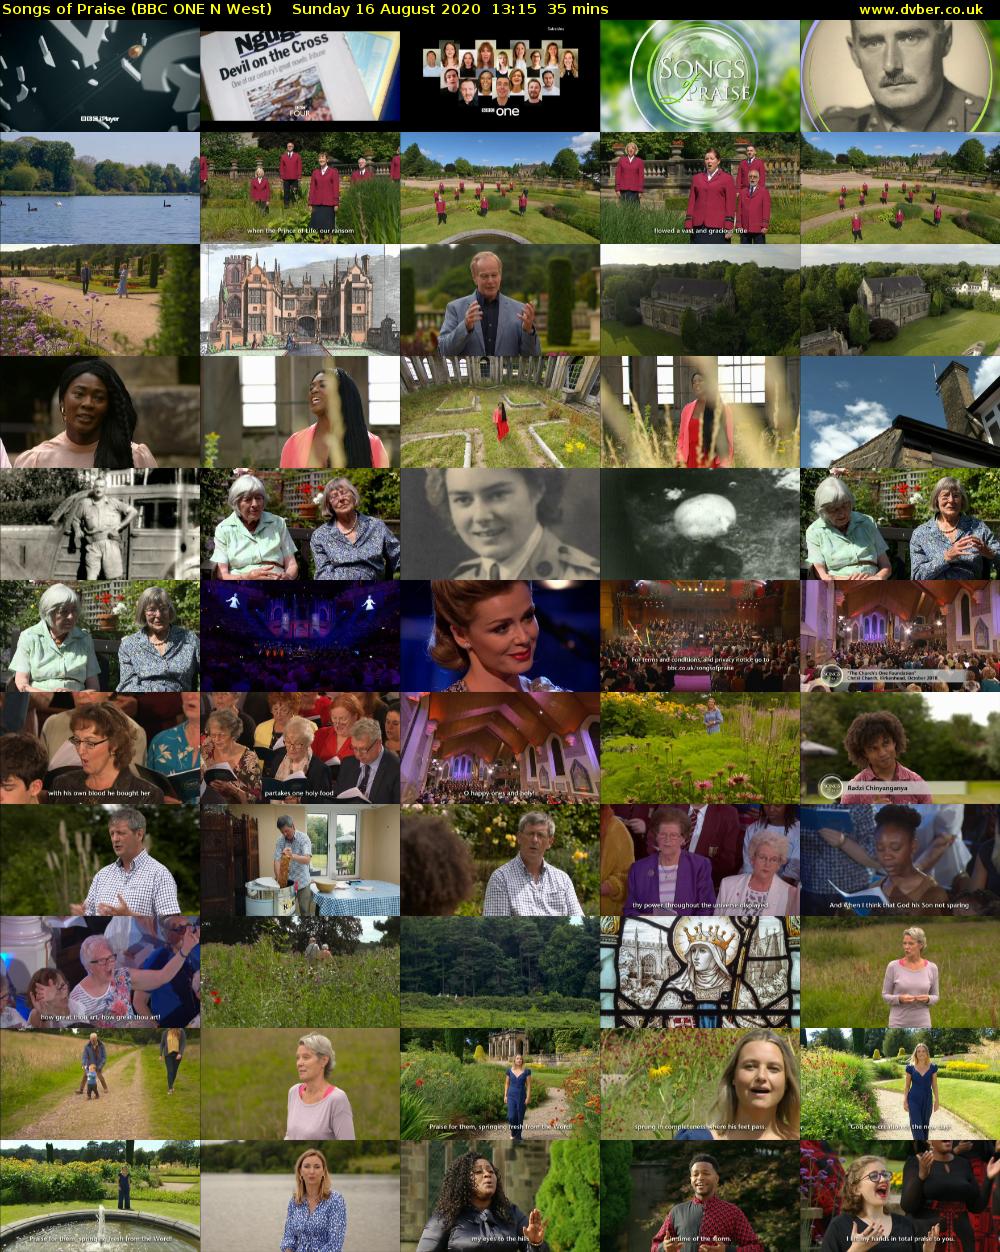 Songs of Praise (BBC ONE N West) Sunday 16 August 2020 13:15 - 13:50